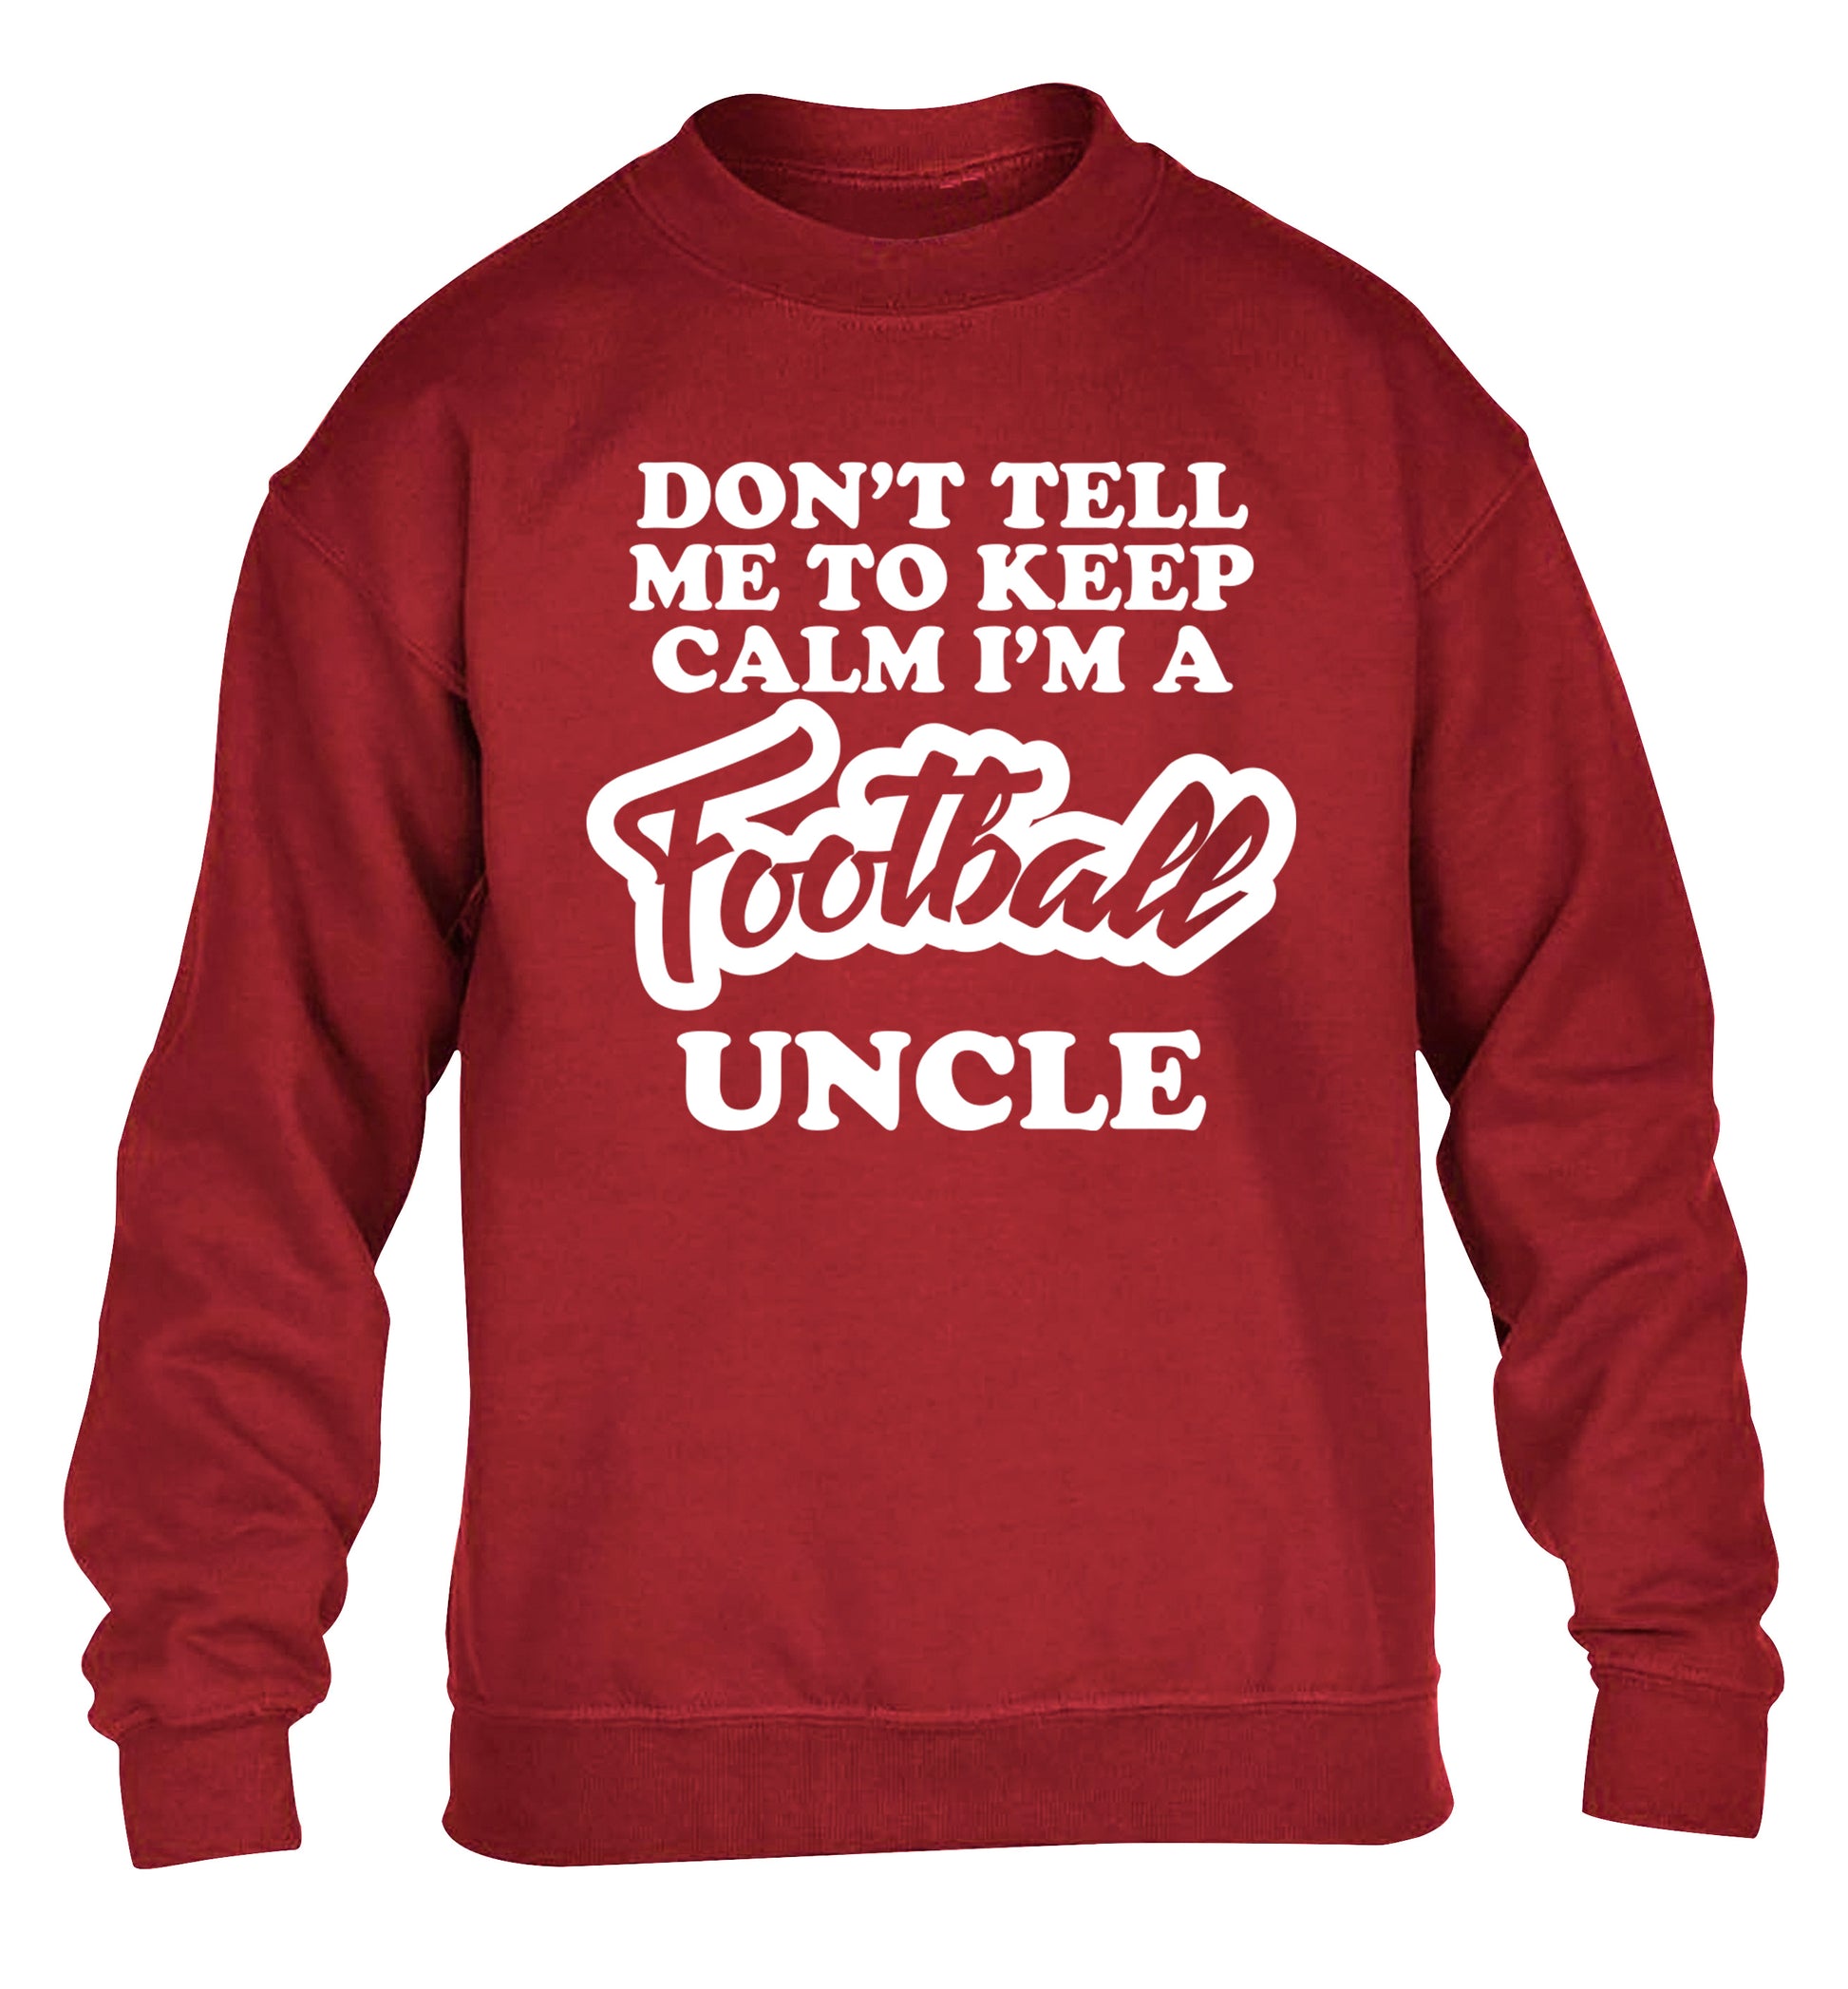 Don't tell me to keep calm I'm a football uncle children's grey sweater 12-14 Years